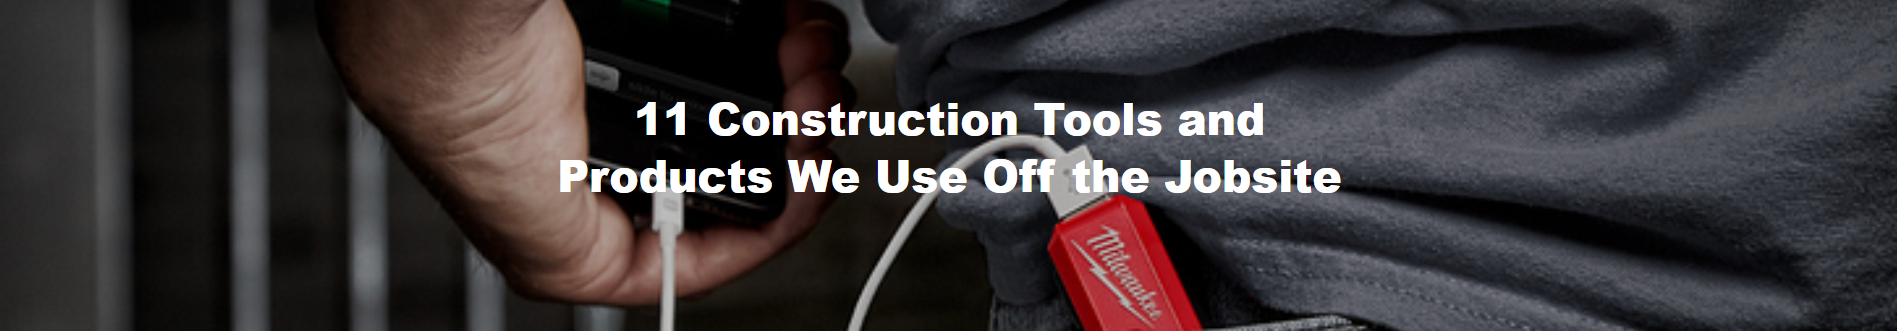 11 Construction Tool and Products We Use Off the Jobsite